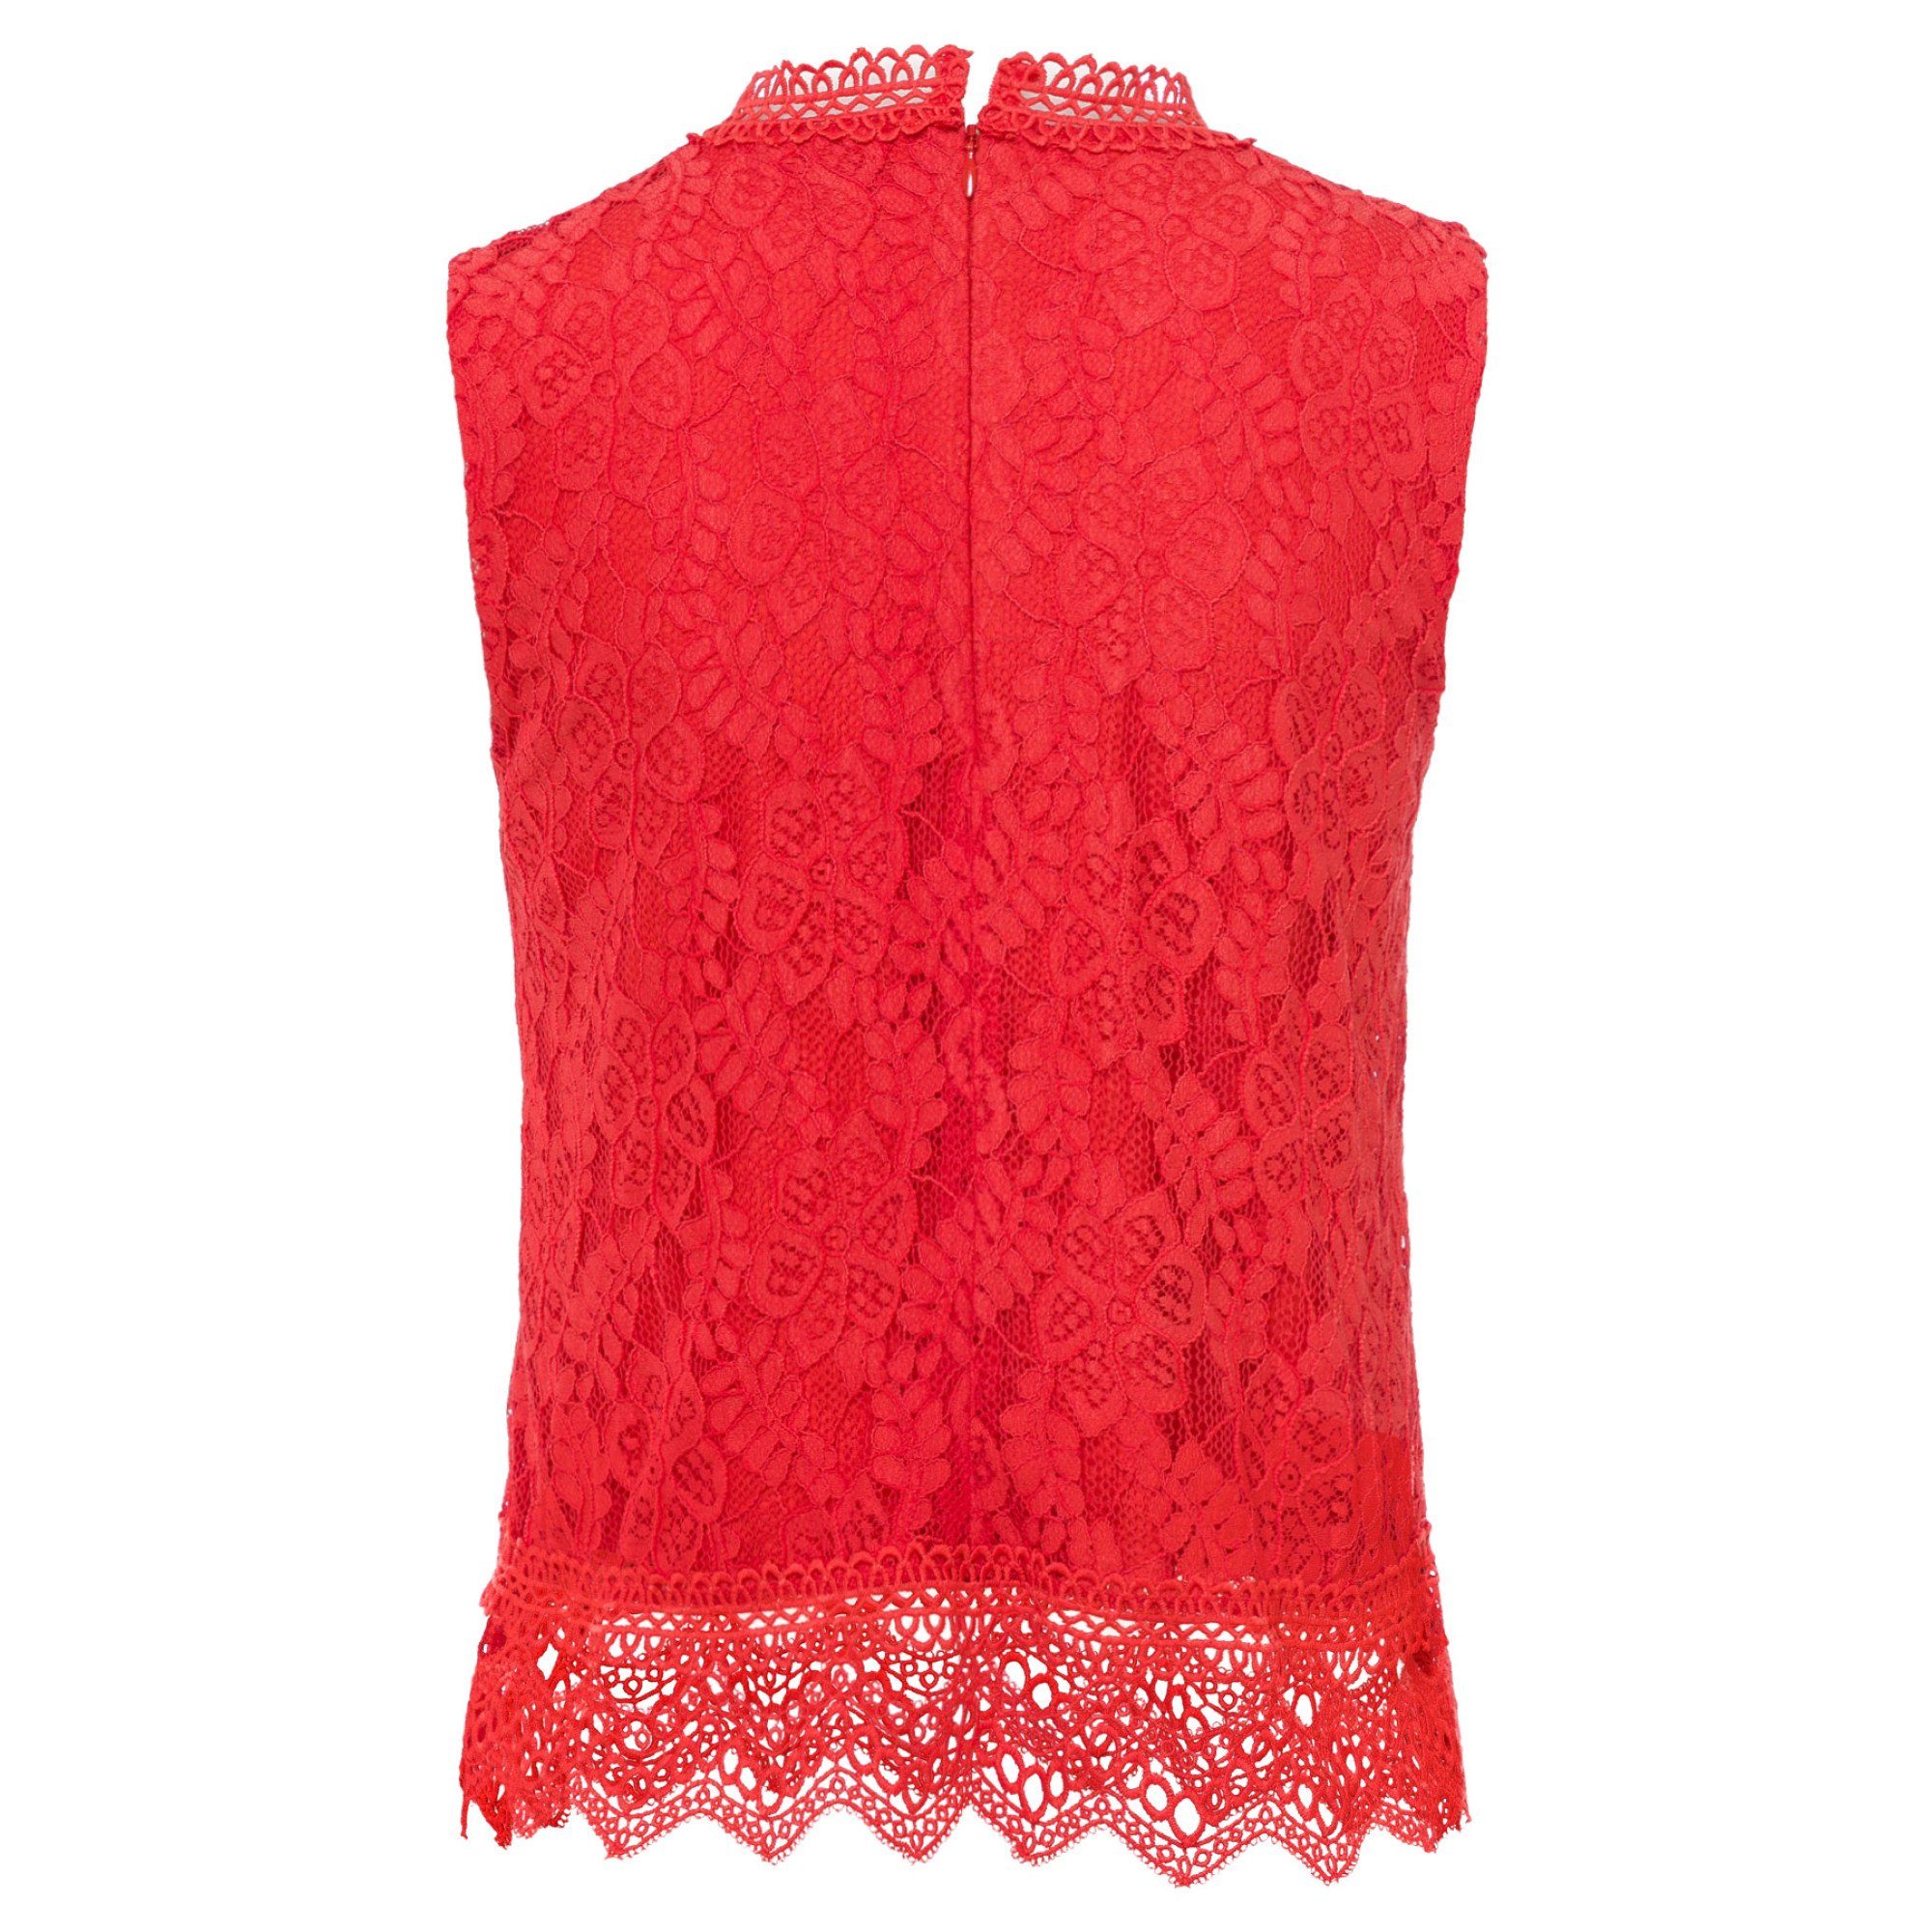 Lace Blouse Rot Hemdbluse 0524 MORE&MORE